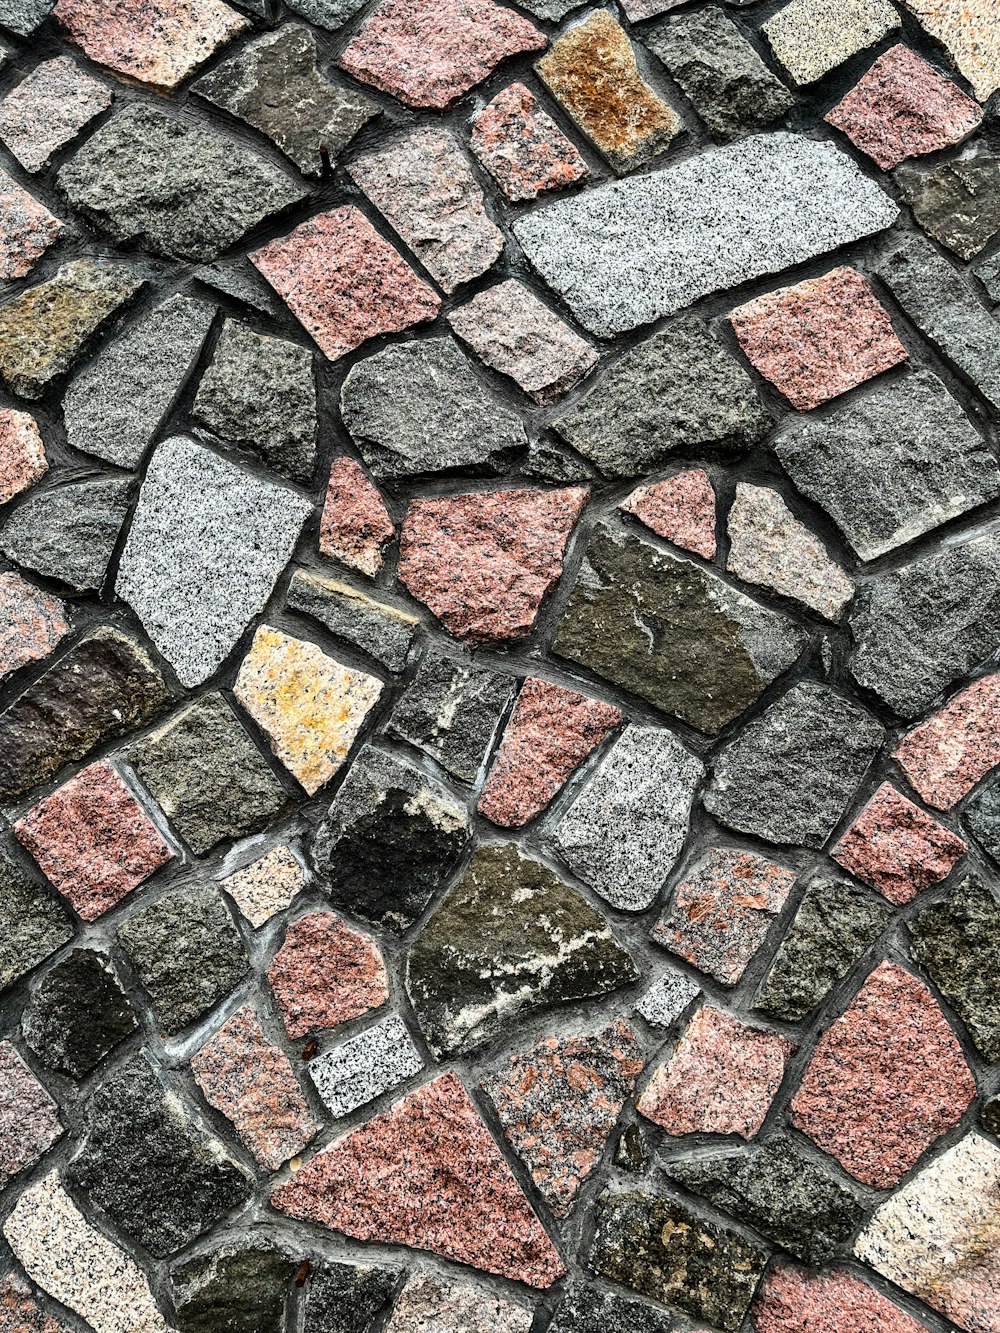 a close up of a stone wall made of small rocks